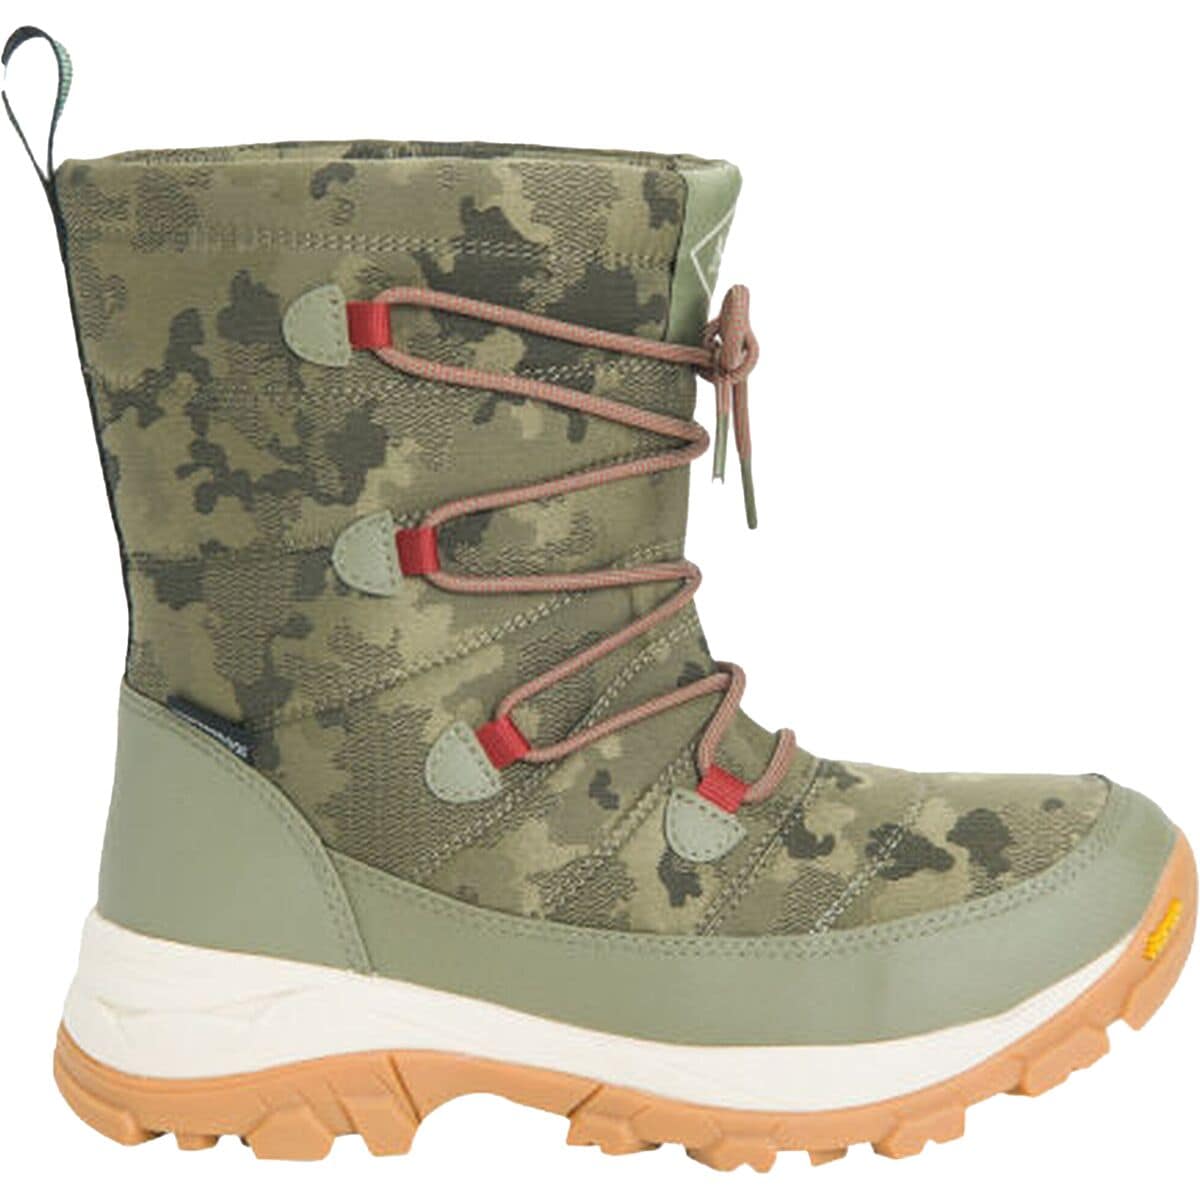 Muck Boots Nomadic Sport AGAT Lace Boot - Women's